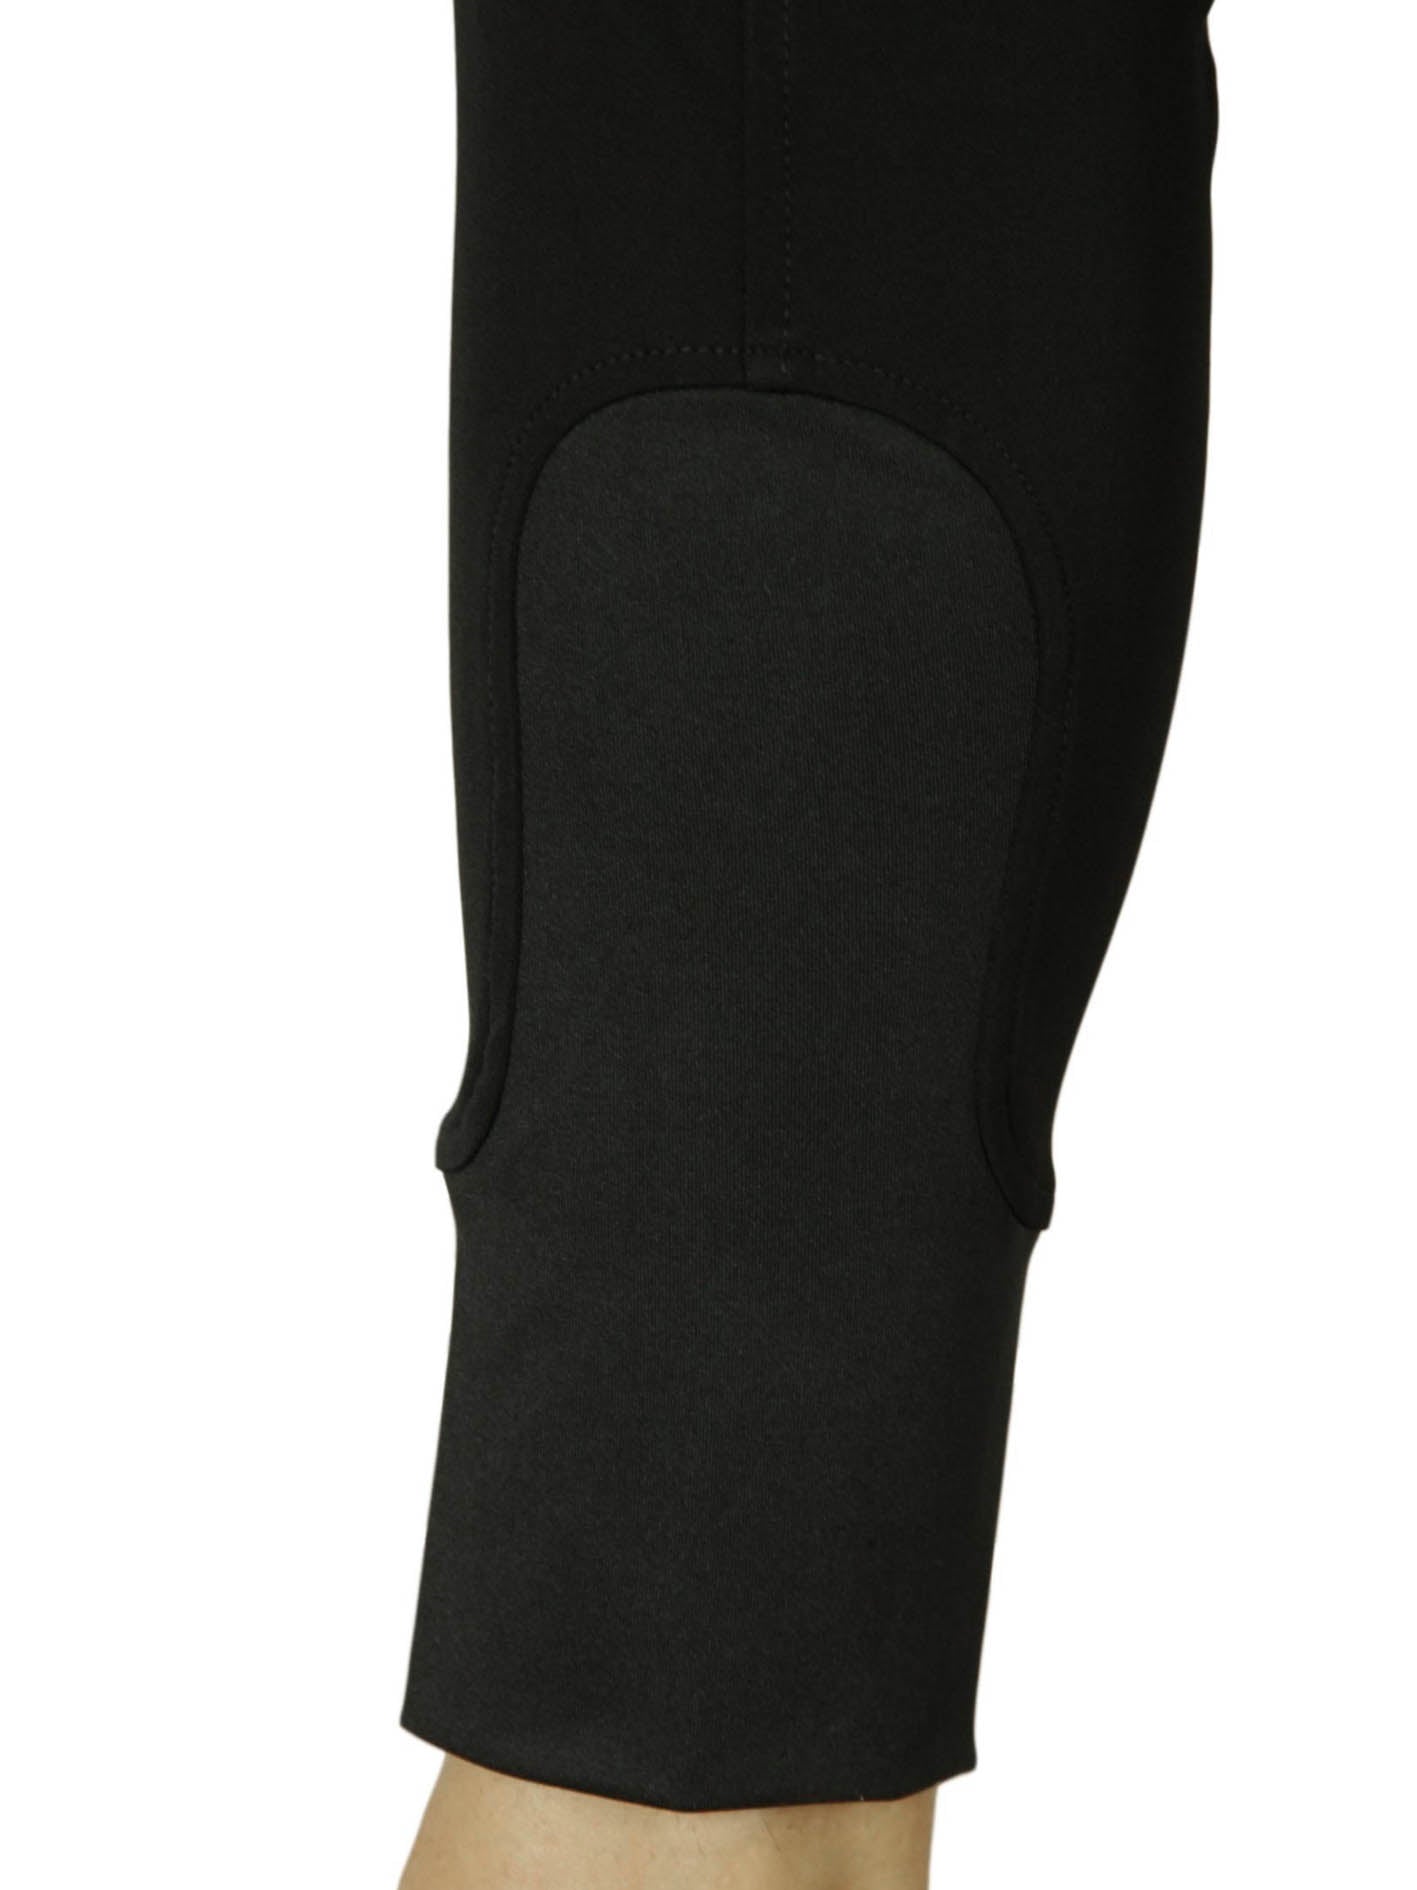 CoolMax Black Breeches in sizes 6 to 28 - No Silicone-Plum Tack-The Equestrian